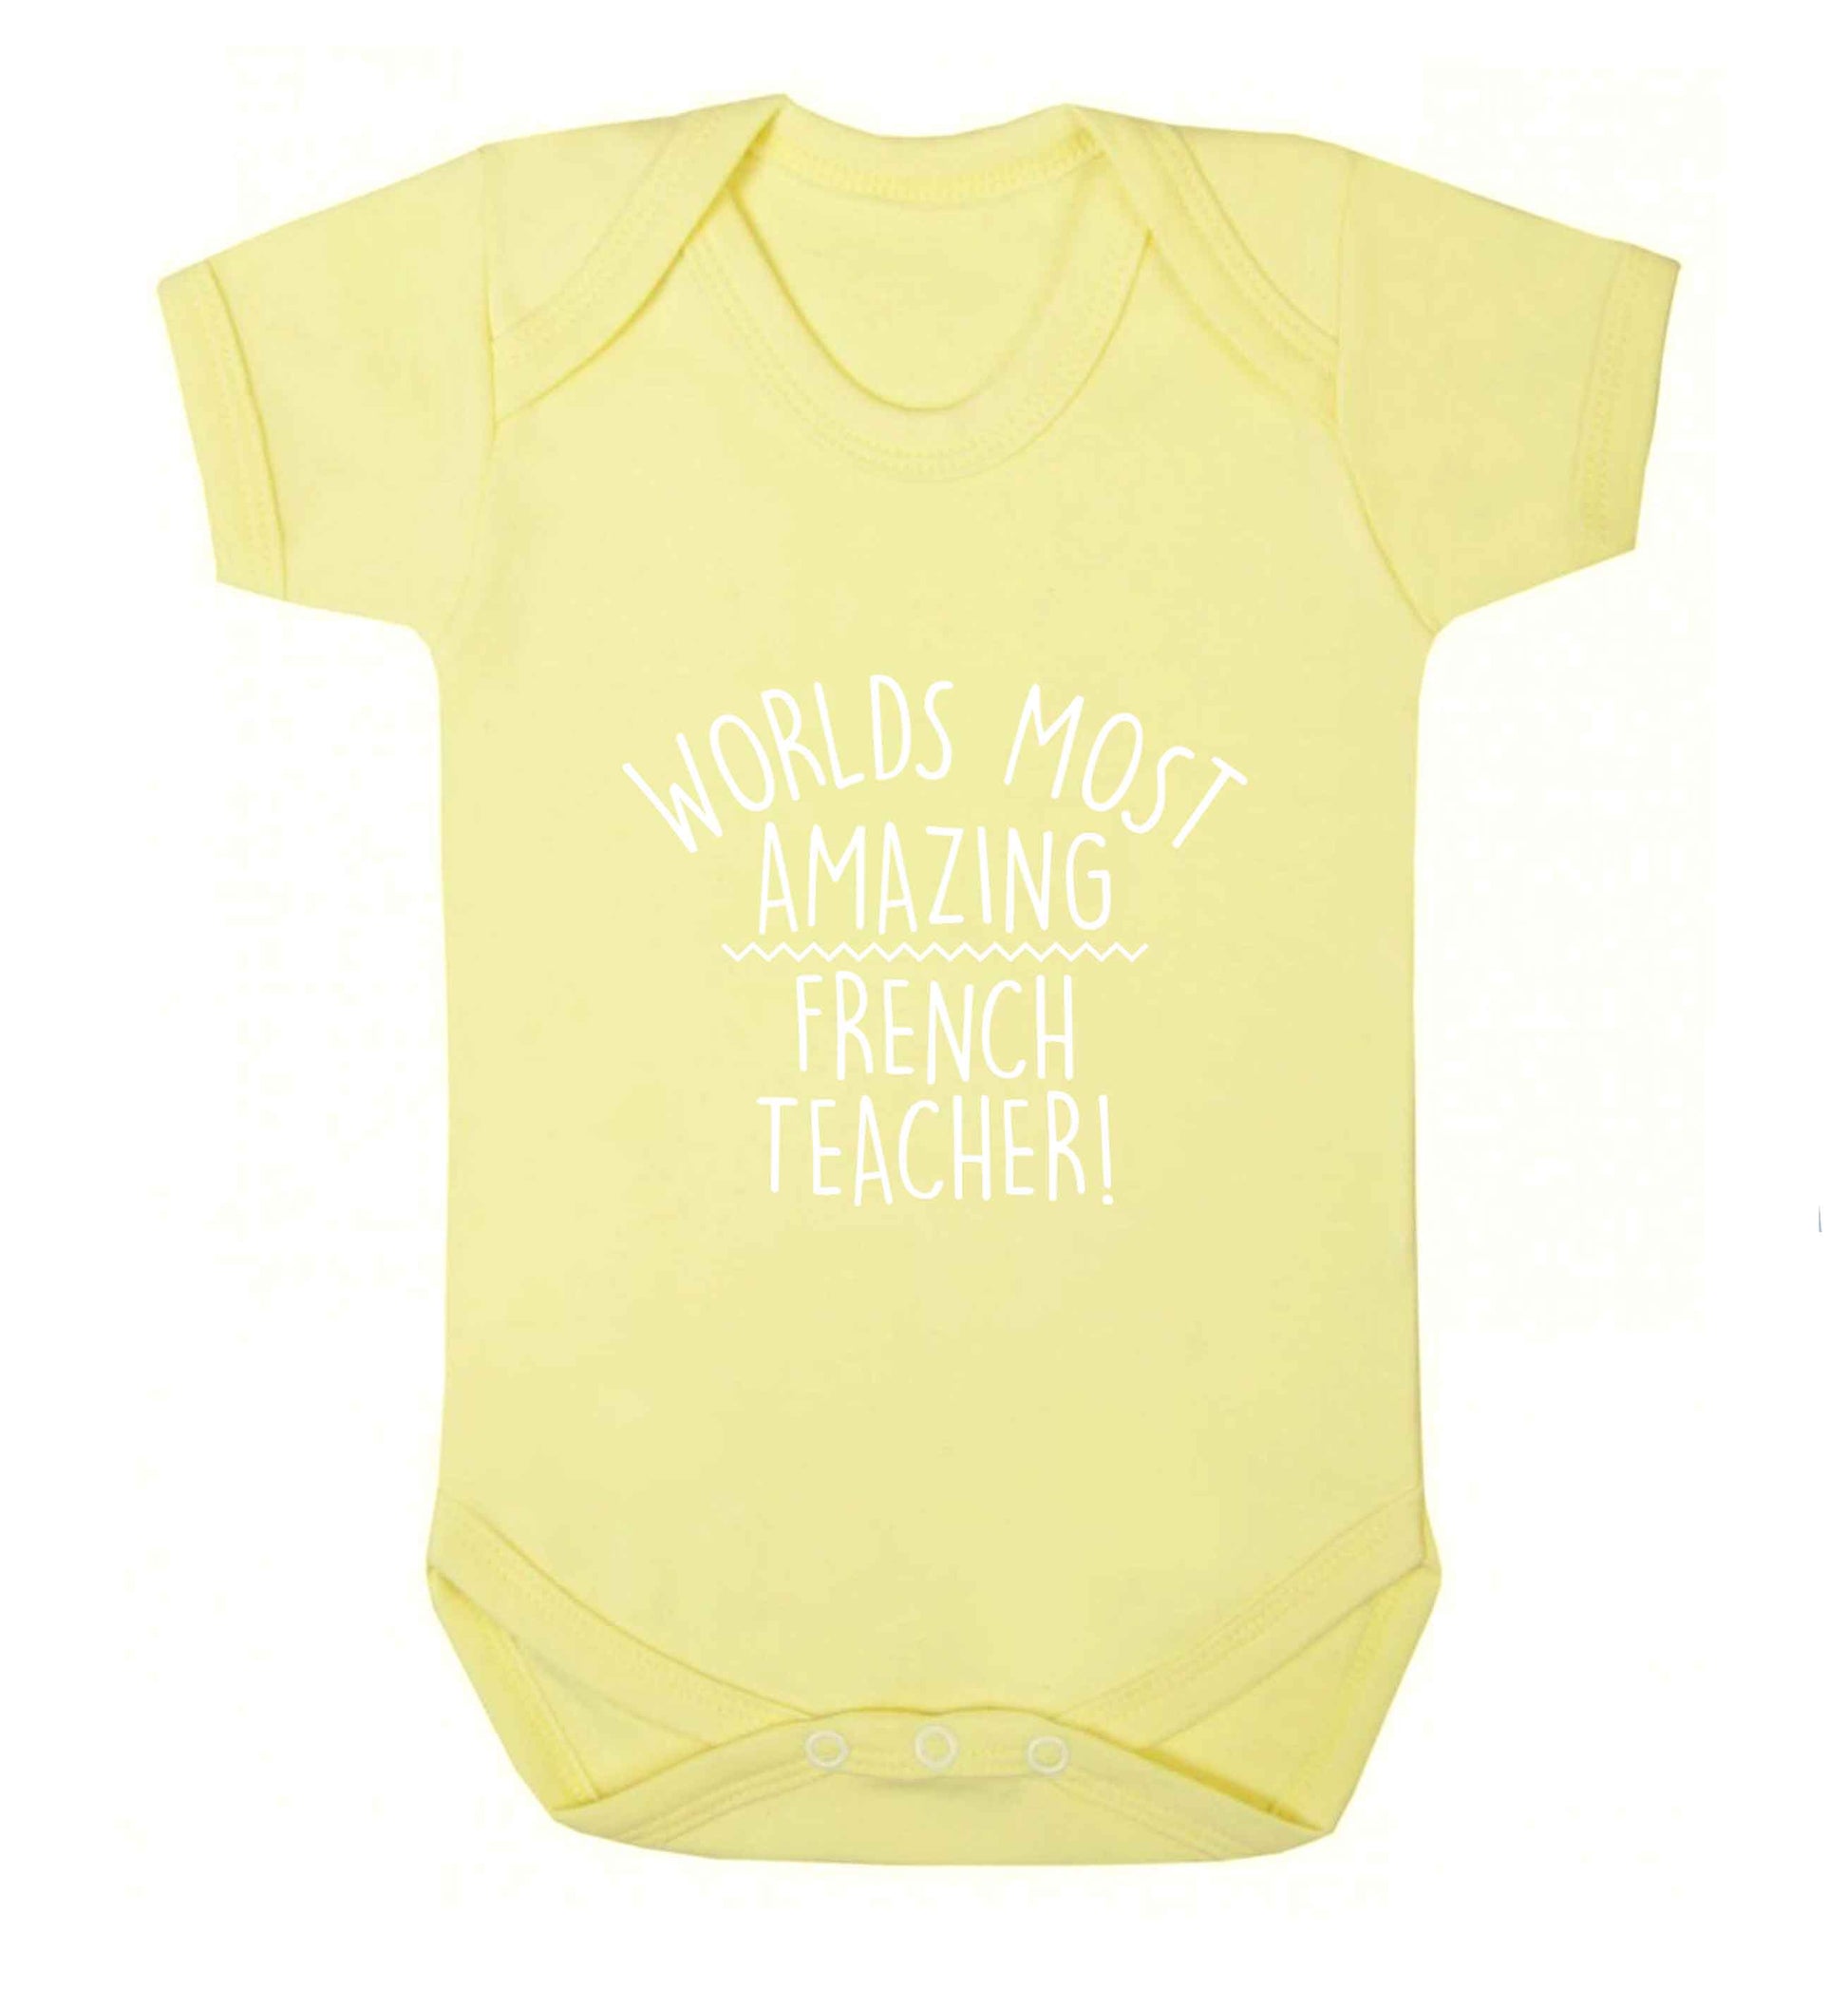 Worlds most amazing French teacher baby vest pale yellow 18-24 months